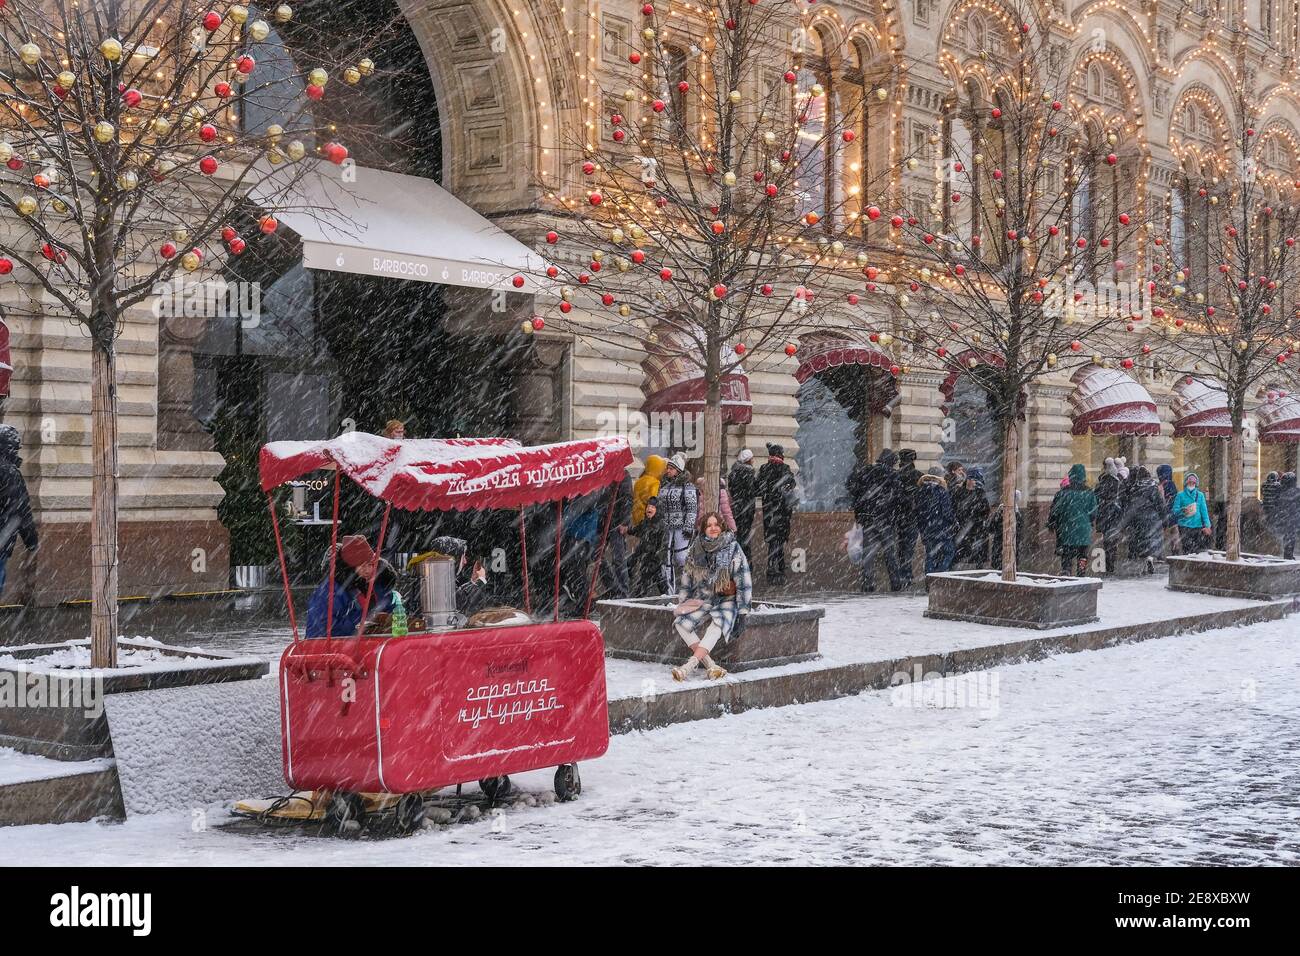 Snowfall in Moscow.Street with Christmas illumination and vintage red street food cart on wheels. Stock Photo